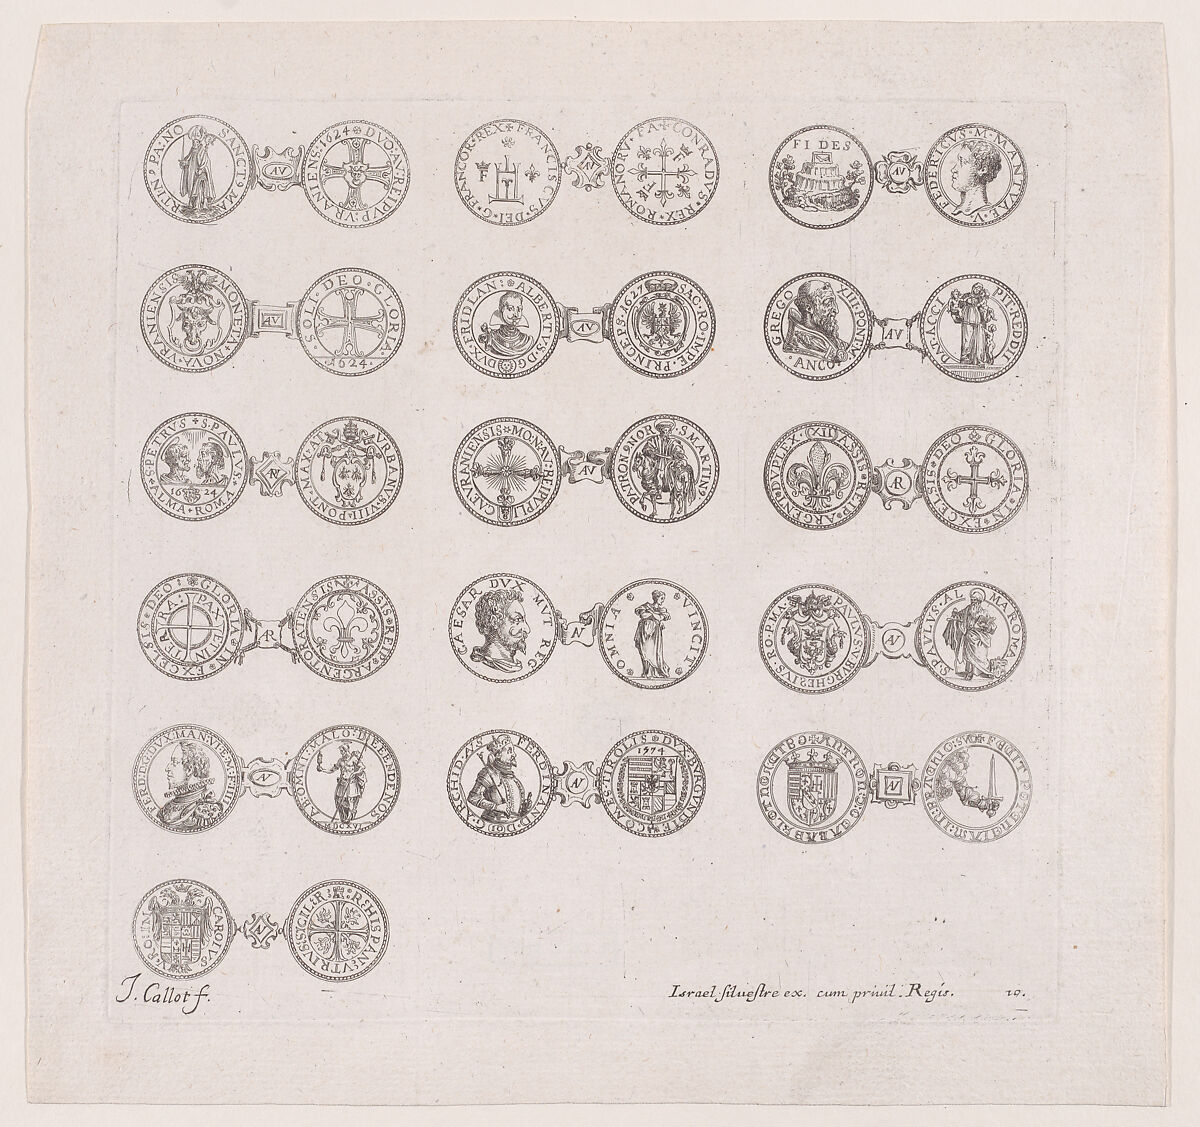 Plate 10, Featuring 16 Coins Issued by European Princes in the 16th and 17th centuries, from "Les Monnaies" (The Currencies), Jacques Callot (French, Nancy 1592–1635 Nancy), Etching 